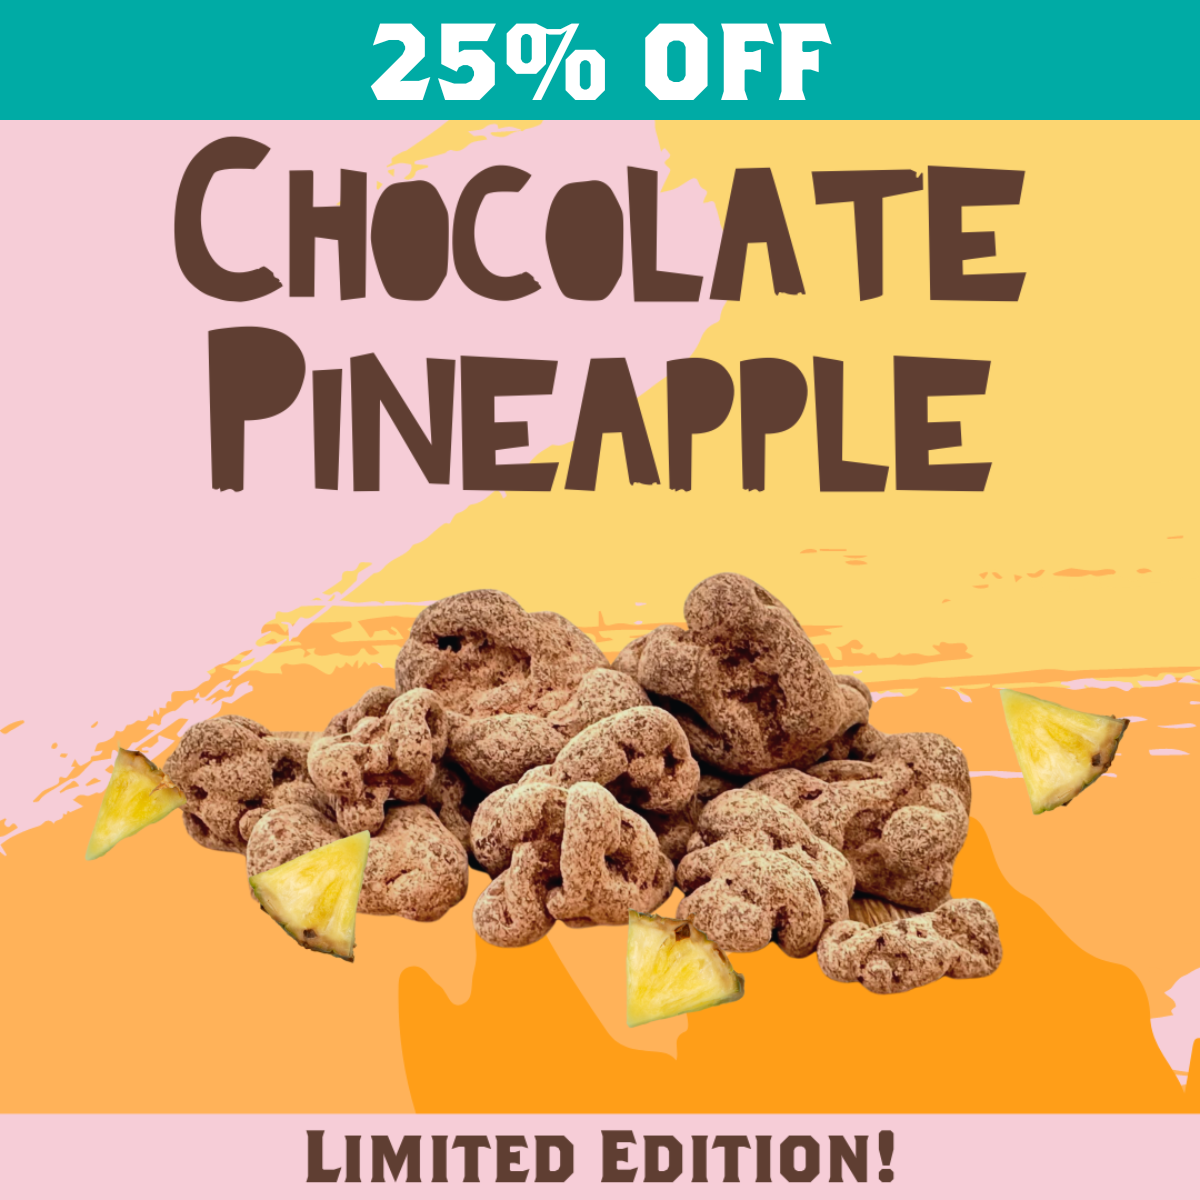 LIMITED EDITION - Chocolate Pineapple